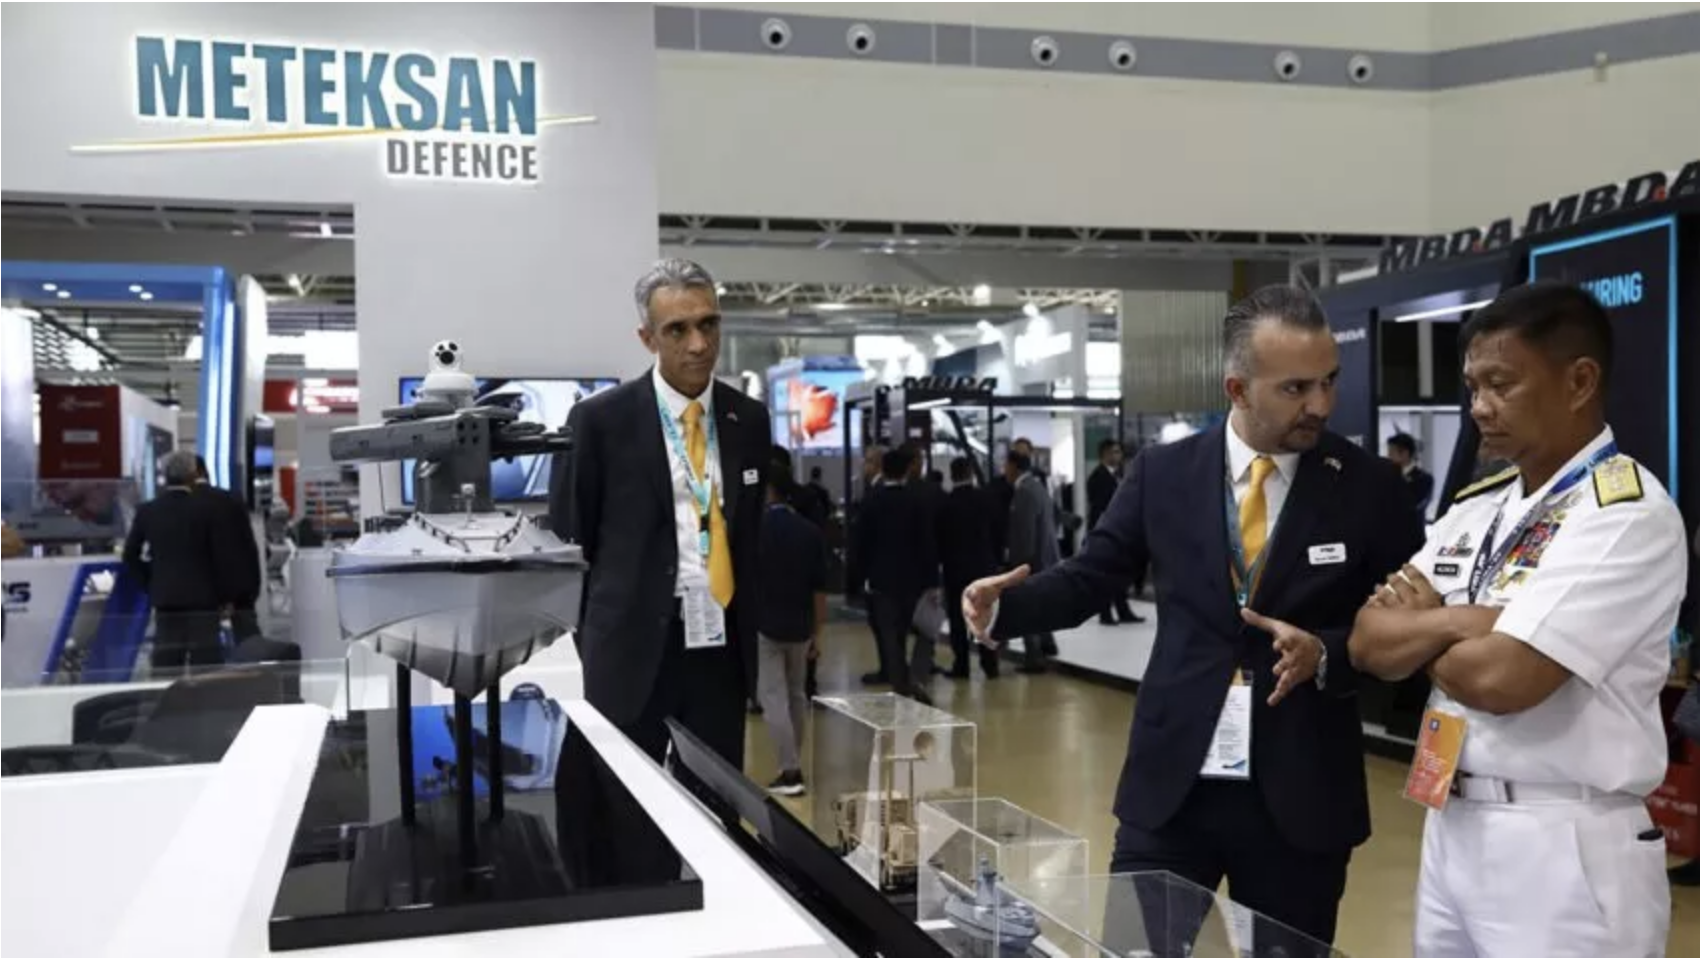 Meteksan Defence exhibits its products at LIMA in Malaysia